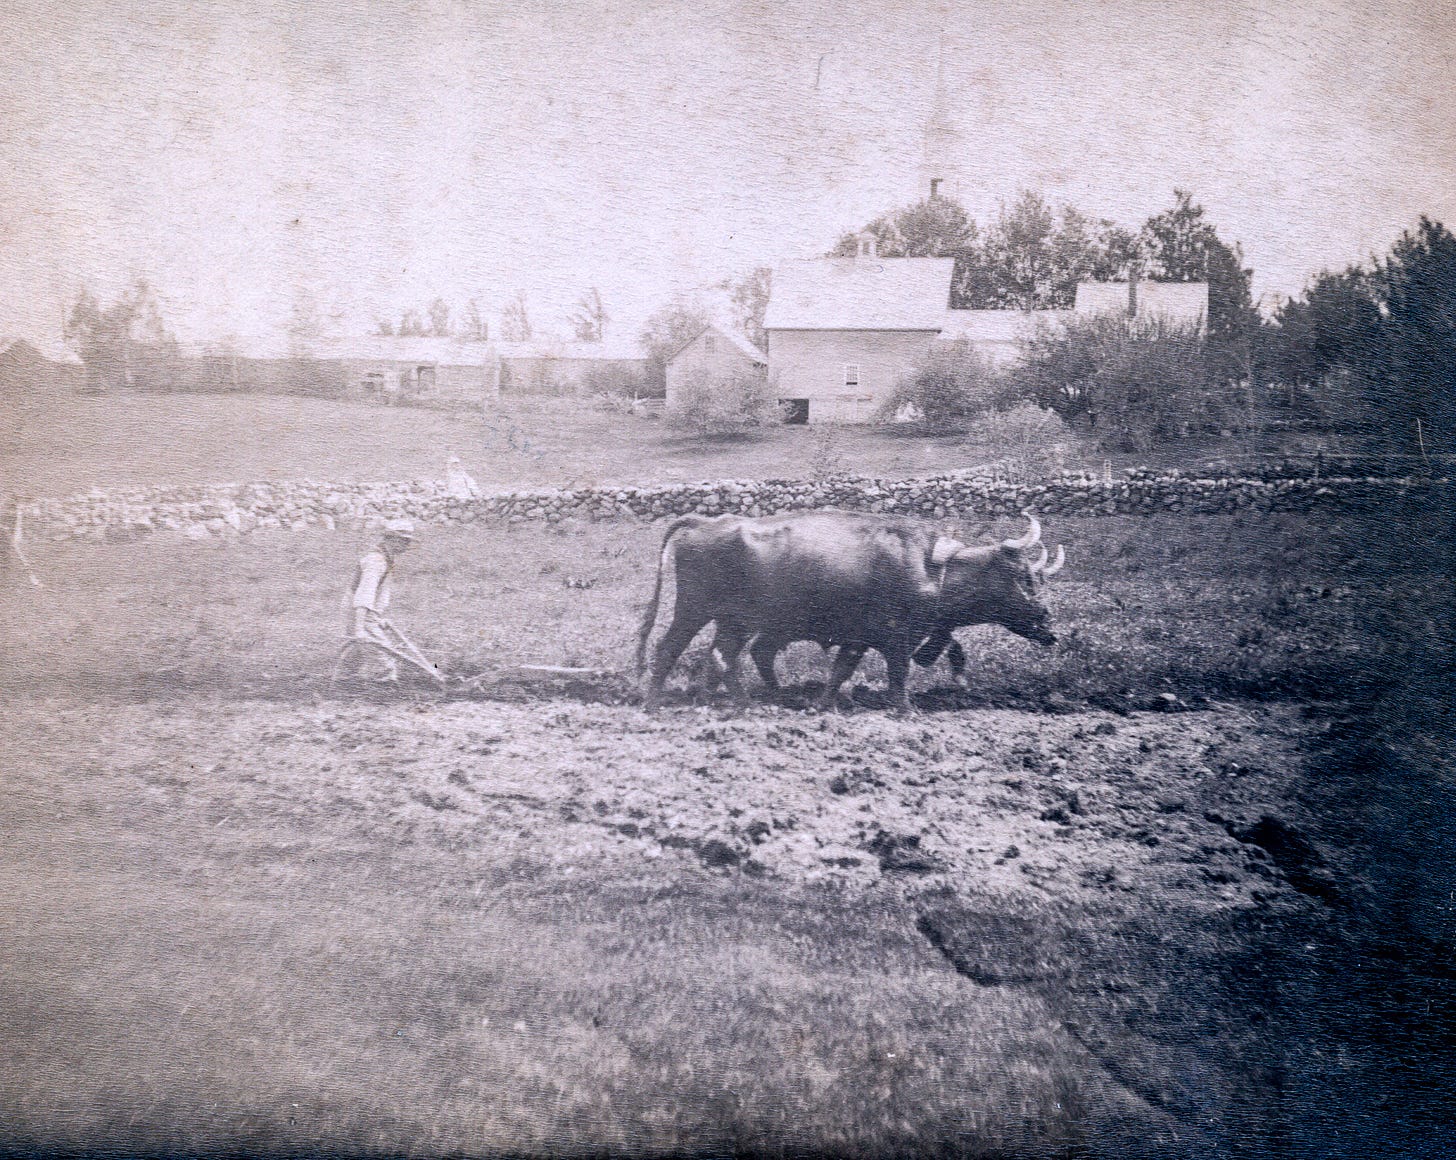 Man plowing field with oxen